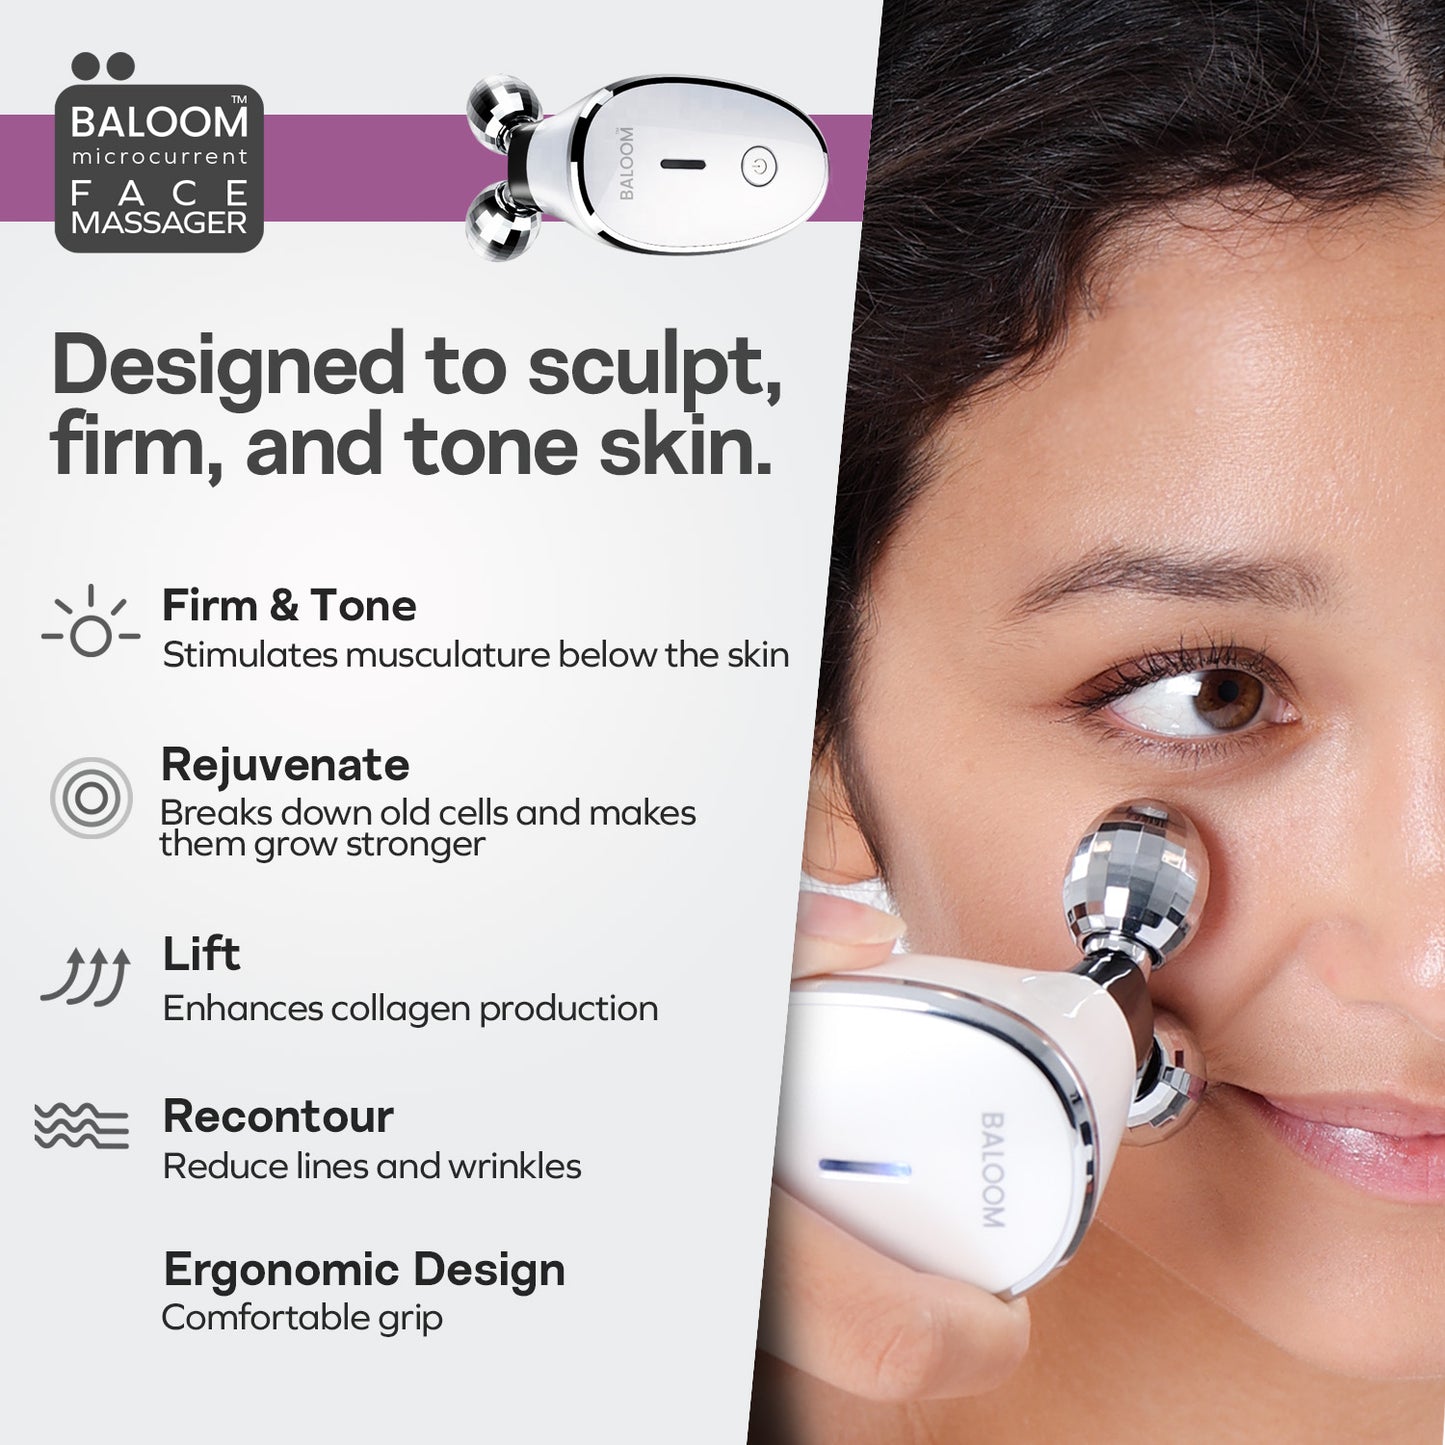 Experience Baloom Microcurrent Face Massager benefits! Firm, tone, and rejuvenate your skin, lifting up by enhancing collagen production, and reducing lines and wrinkles with handy device.